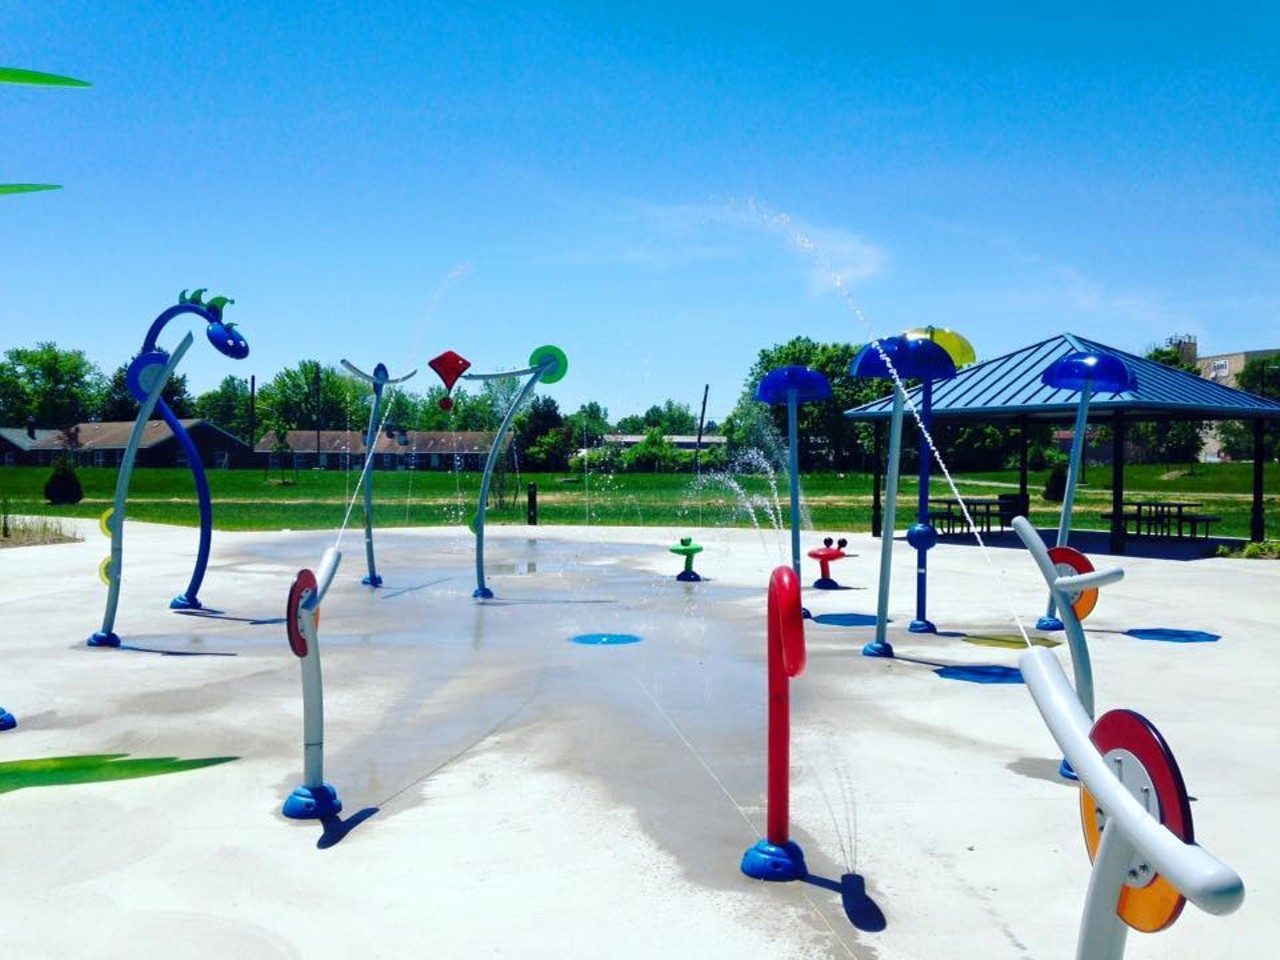 Silver Street Park
2043 Silver Street 
Located in New Albany, Silver Street Park has tons of amenities, including a great public splash pad.  Photo via  City of New Albany 